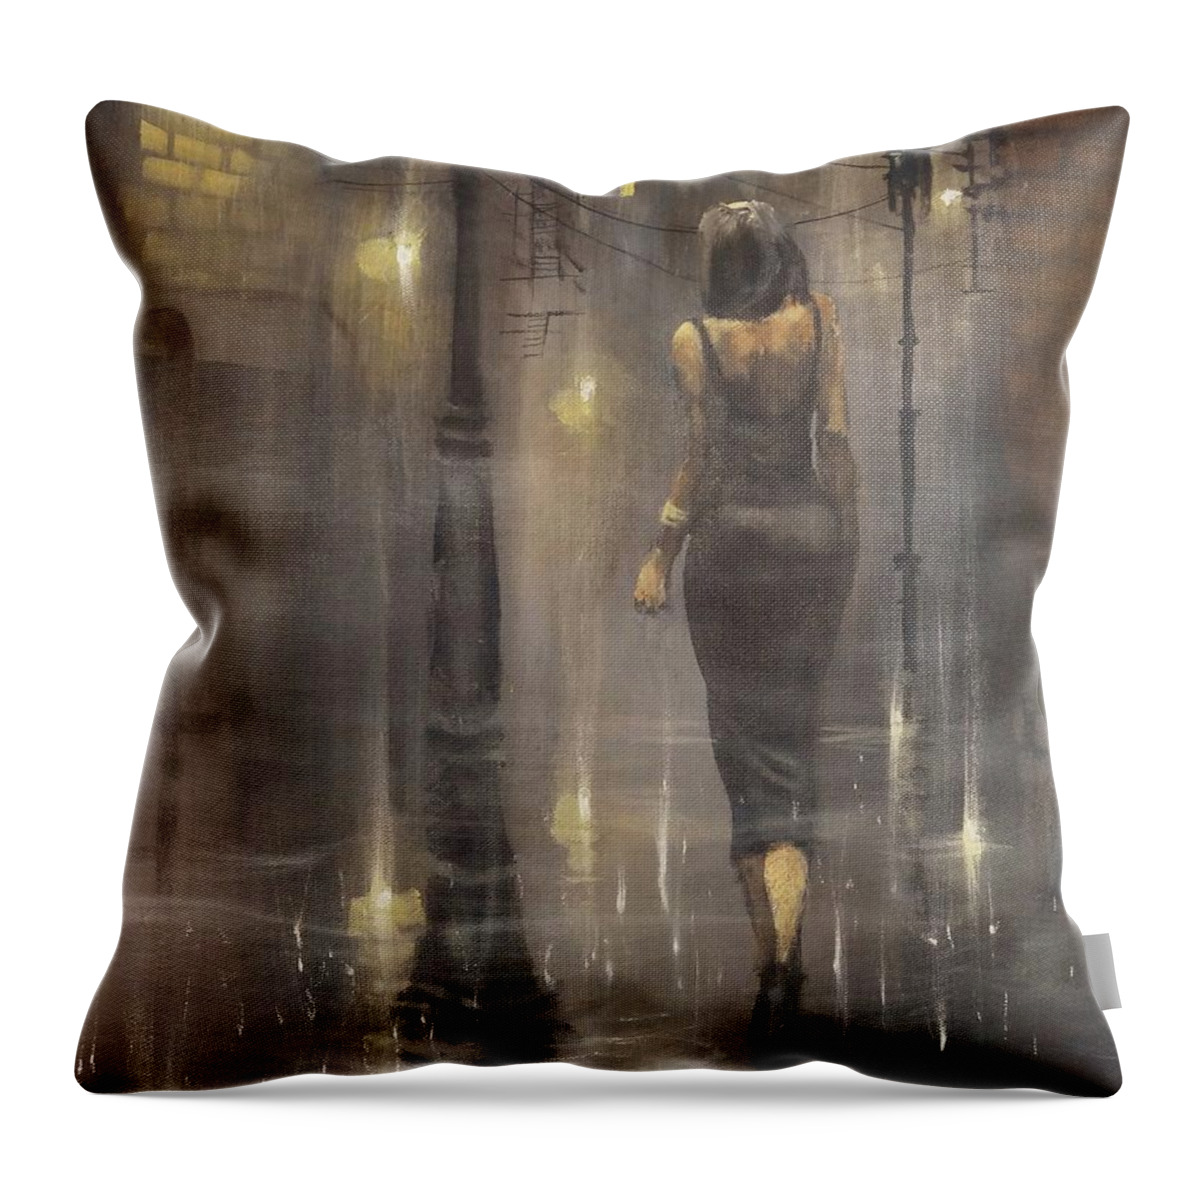 Patsy Cline; Woman In Black Dress; Foggy Alley; Night City Scene; City Rain; Tom Shropshire Painting; Figure Art Throw Pillow featuring the painting Walking After Midnight by Tom Shropshire